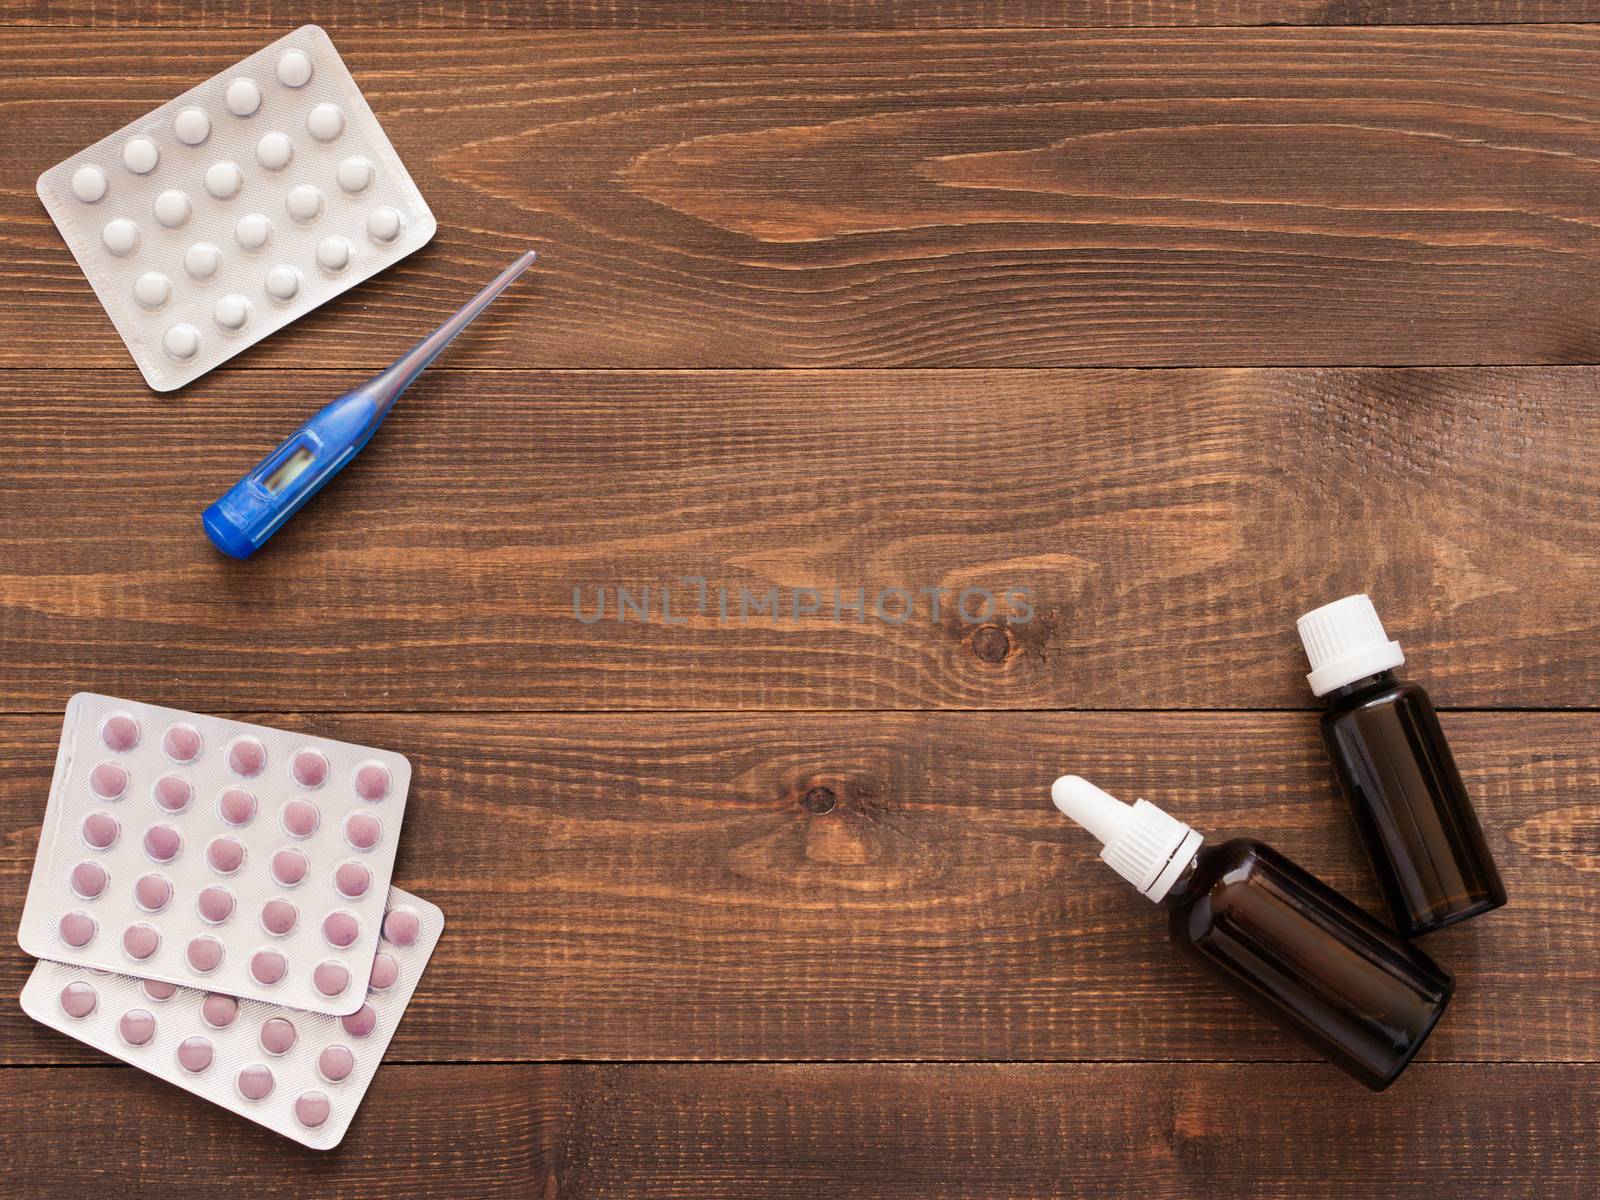 medications and thermometer on a wooden background by fascinadora